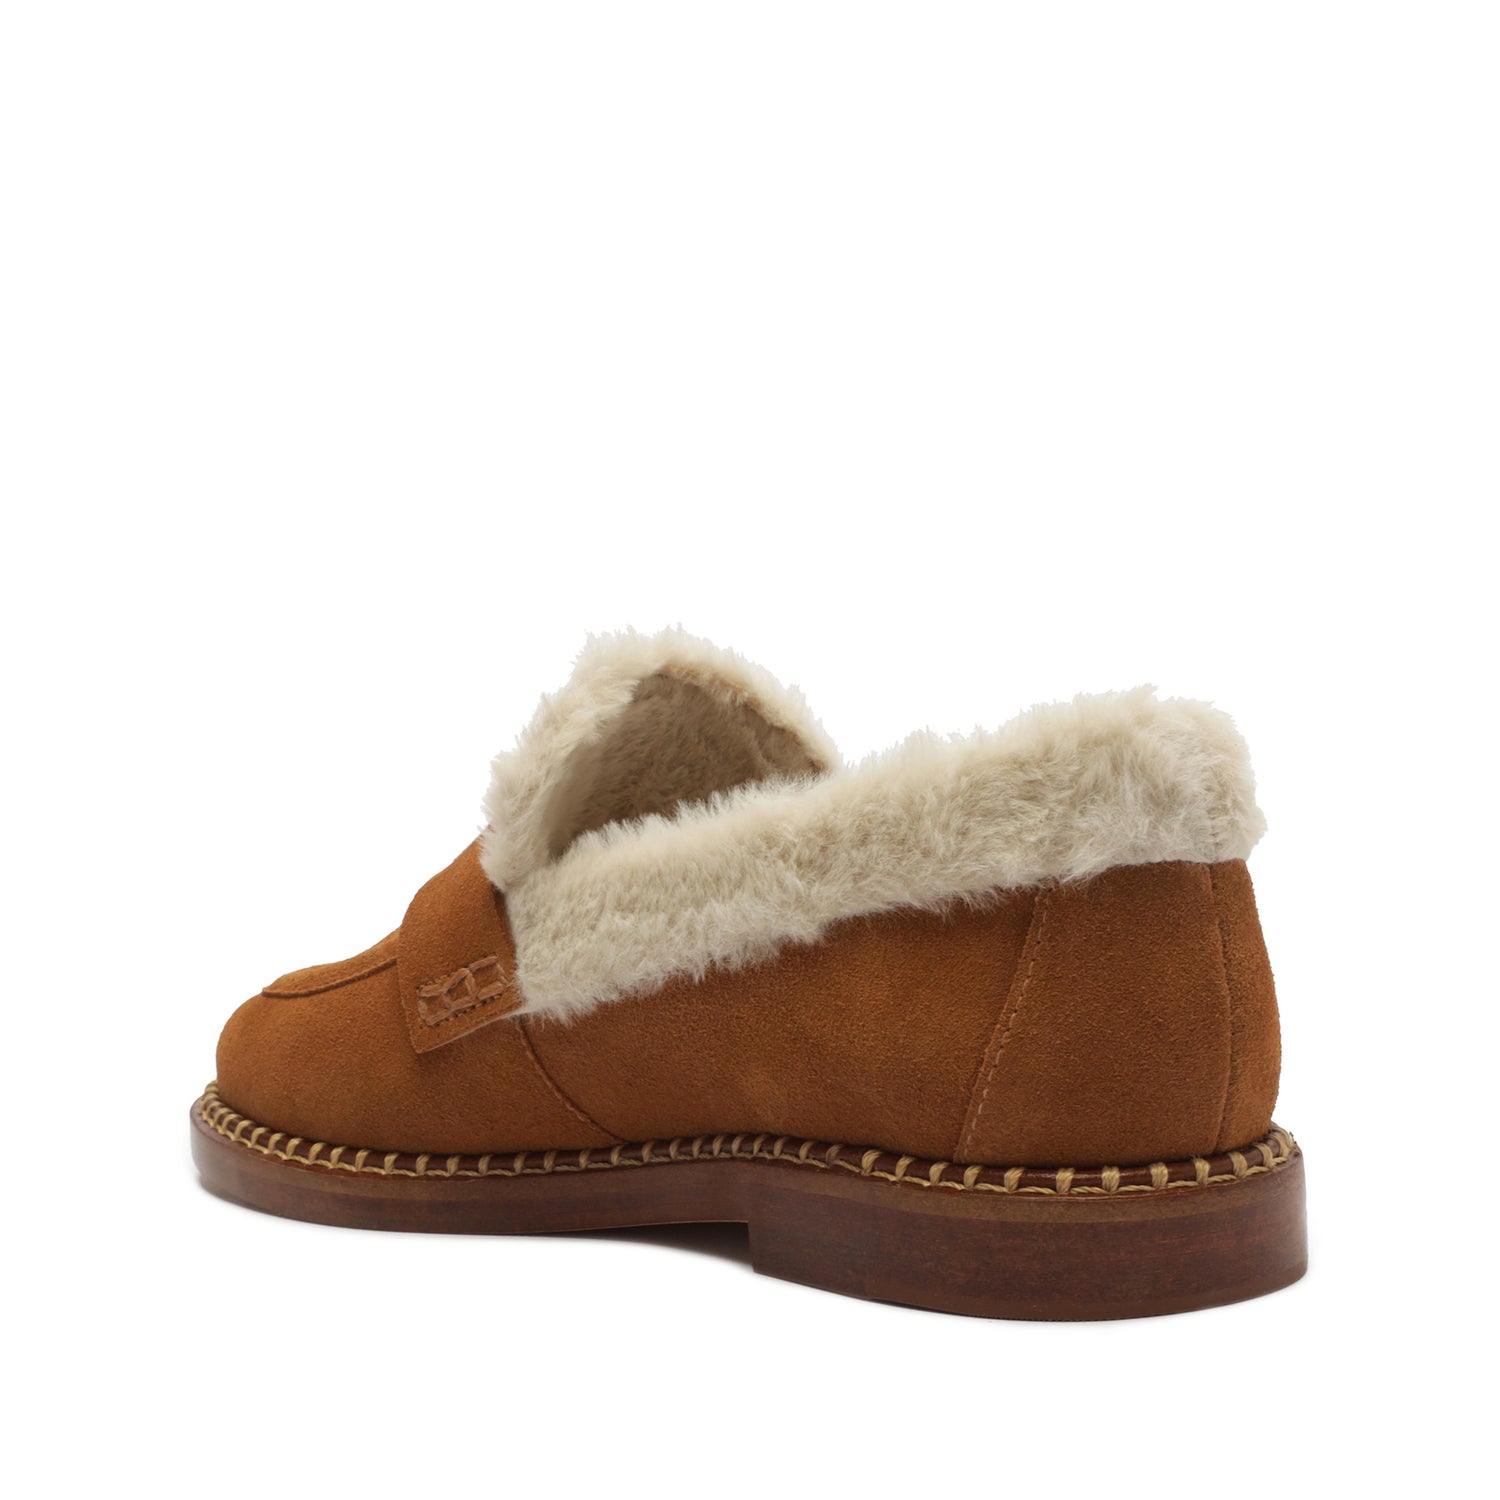 Christie Furry Cow Suede Flat Brown